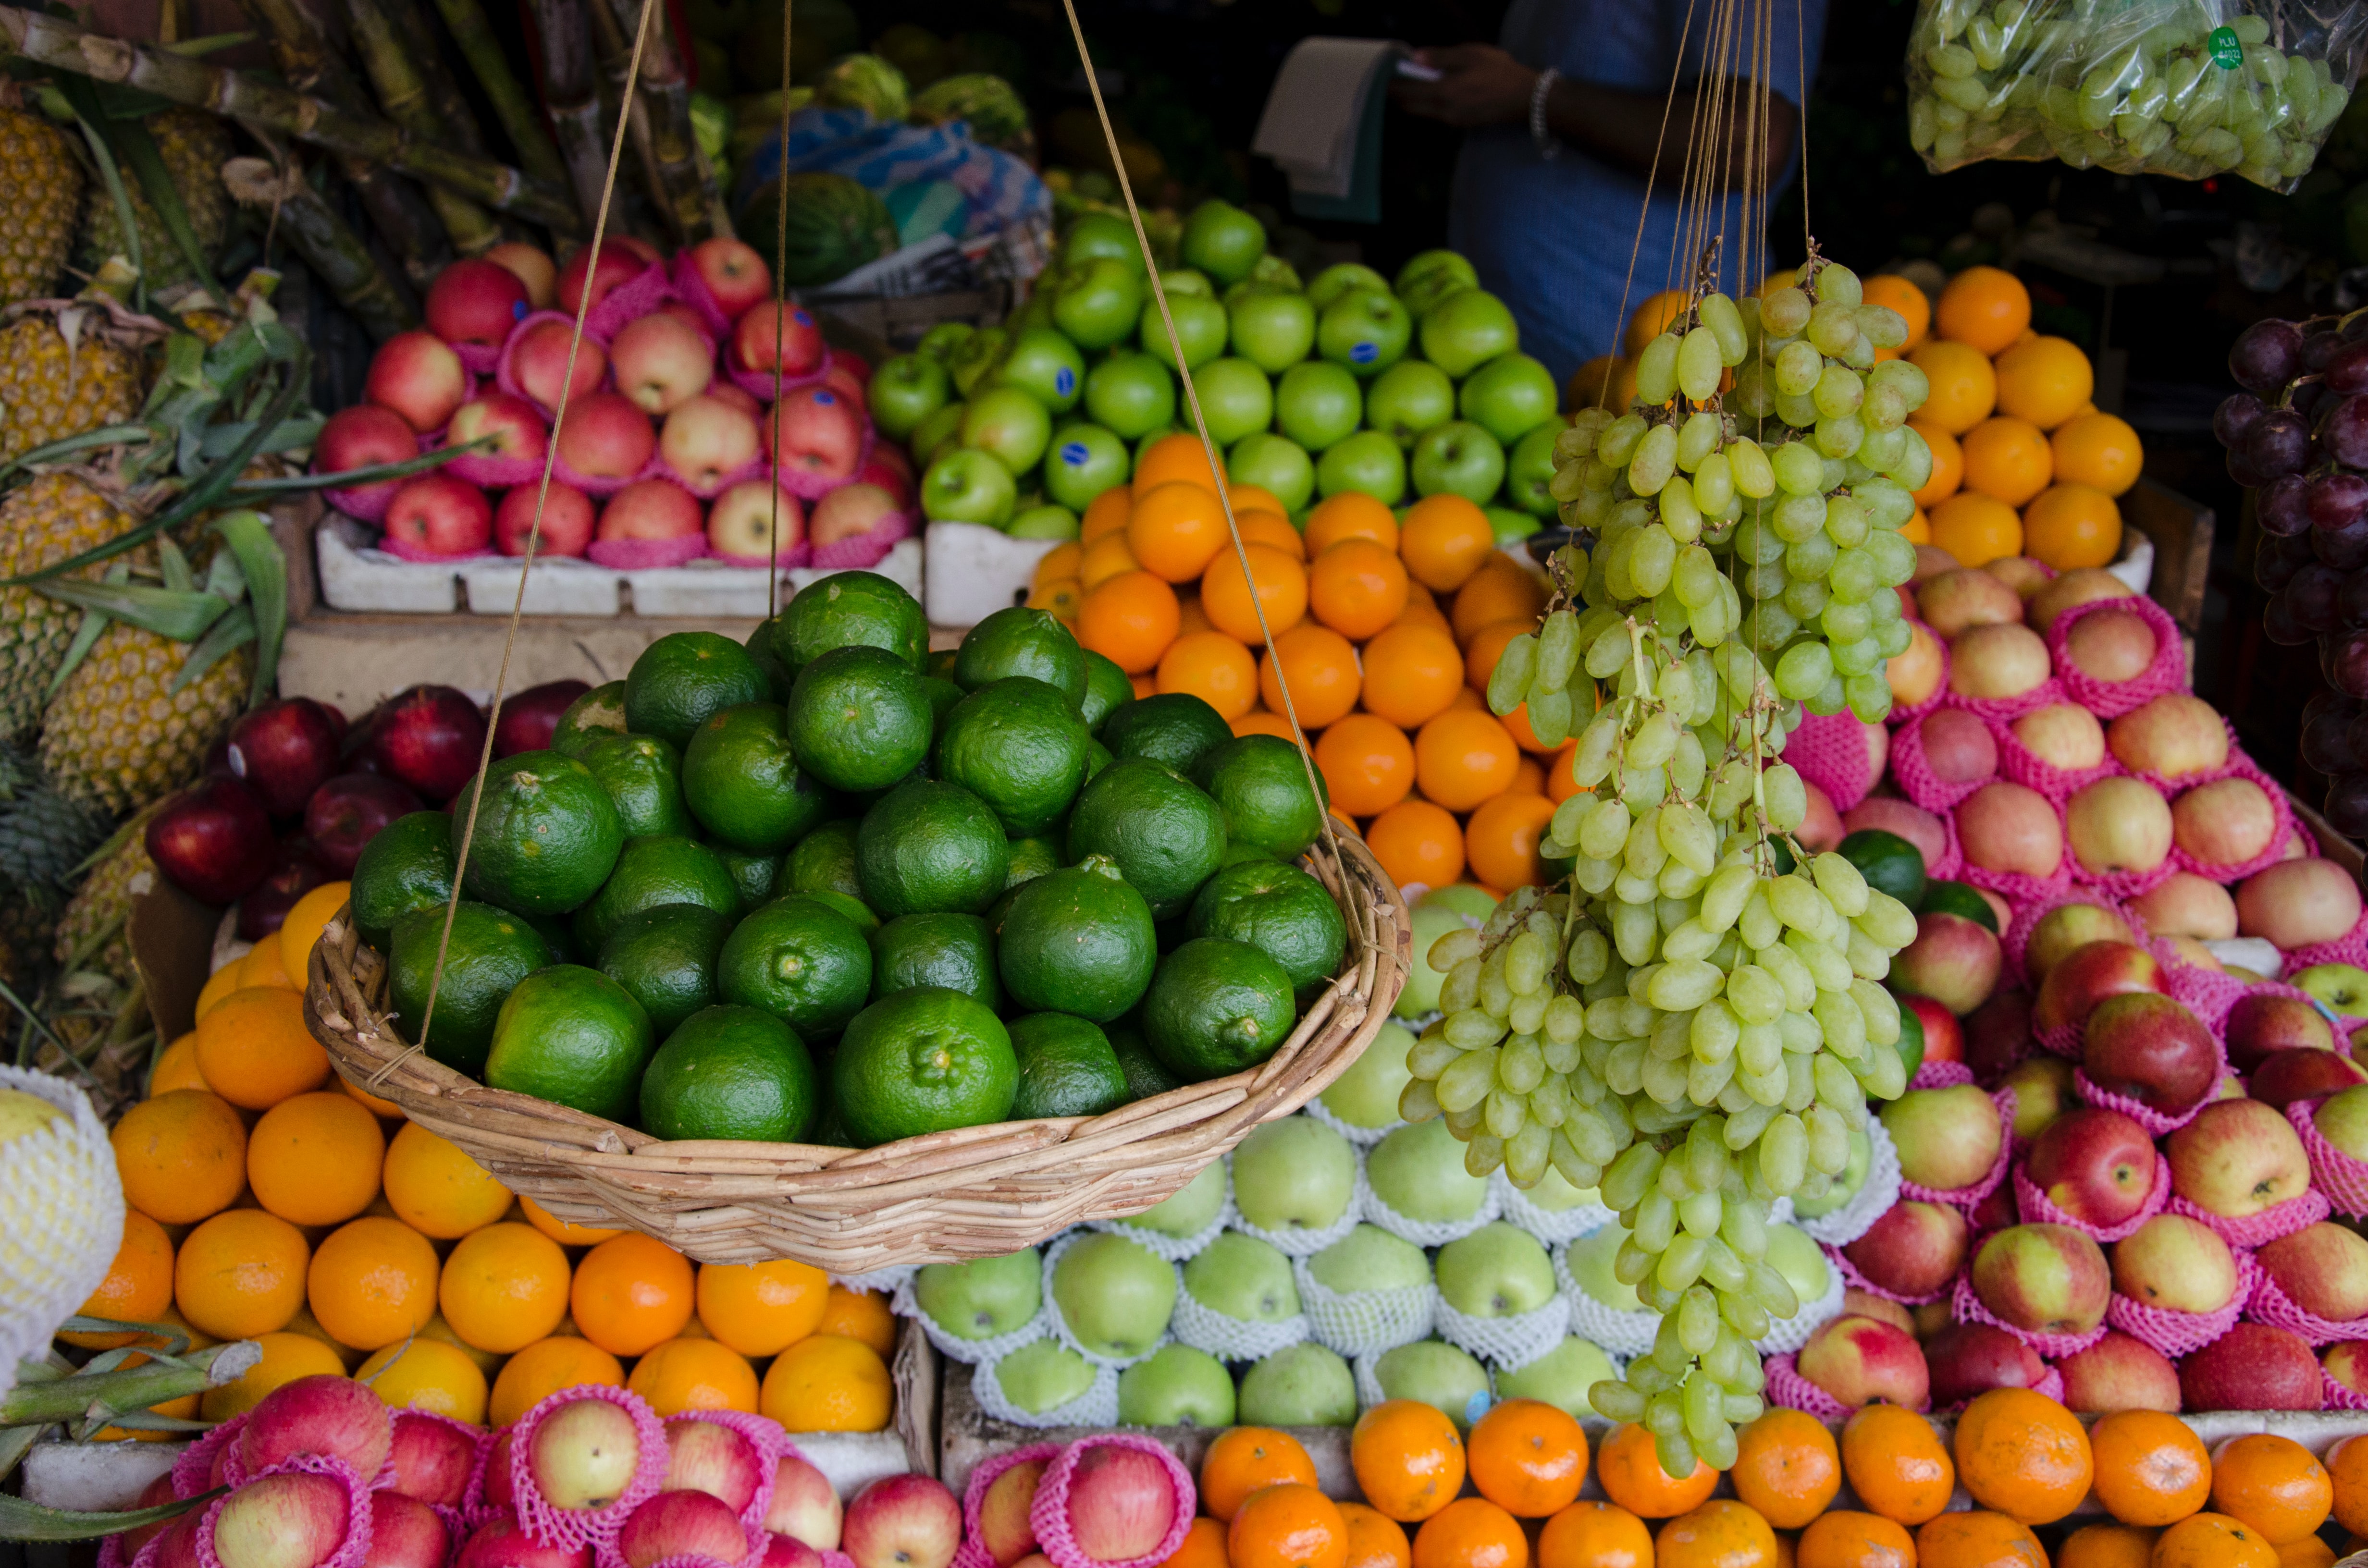 Fruits in the market
